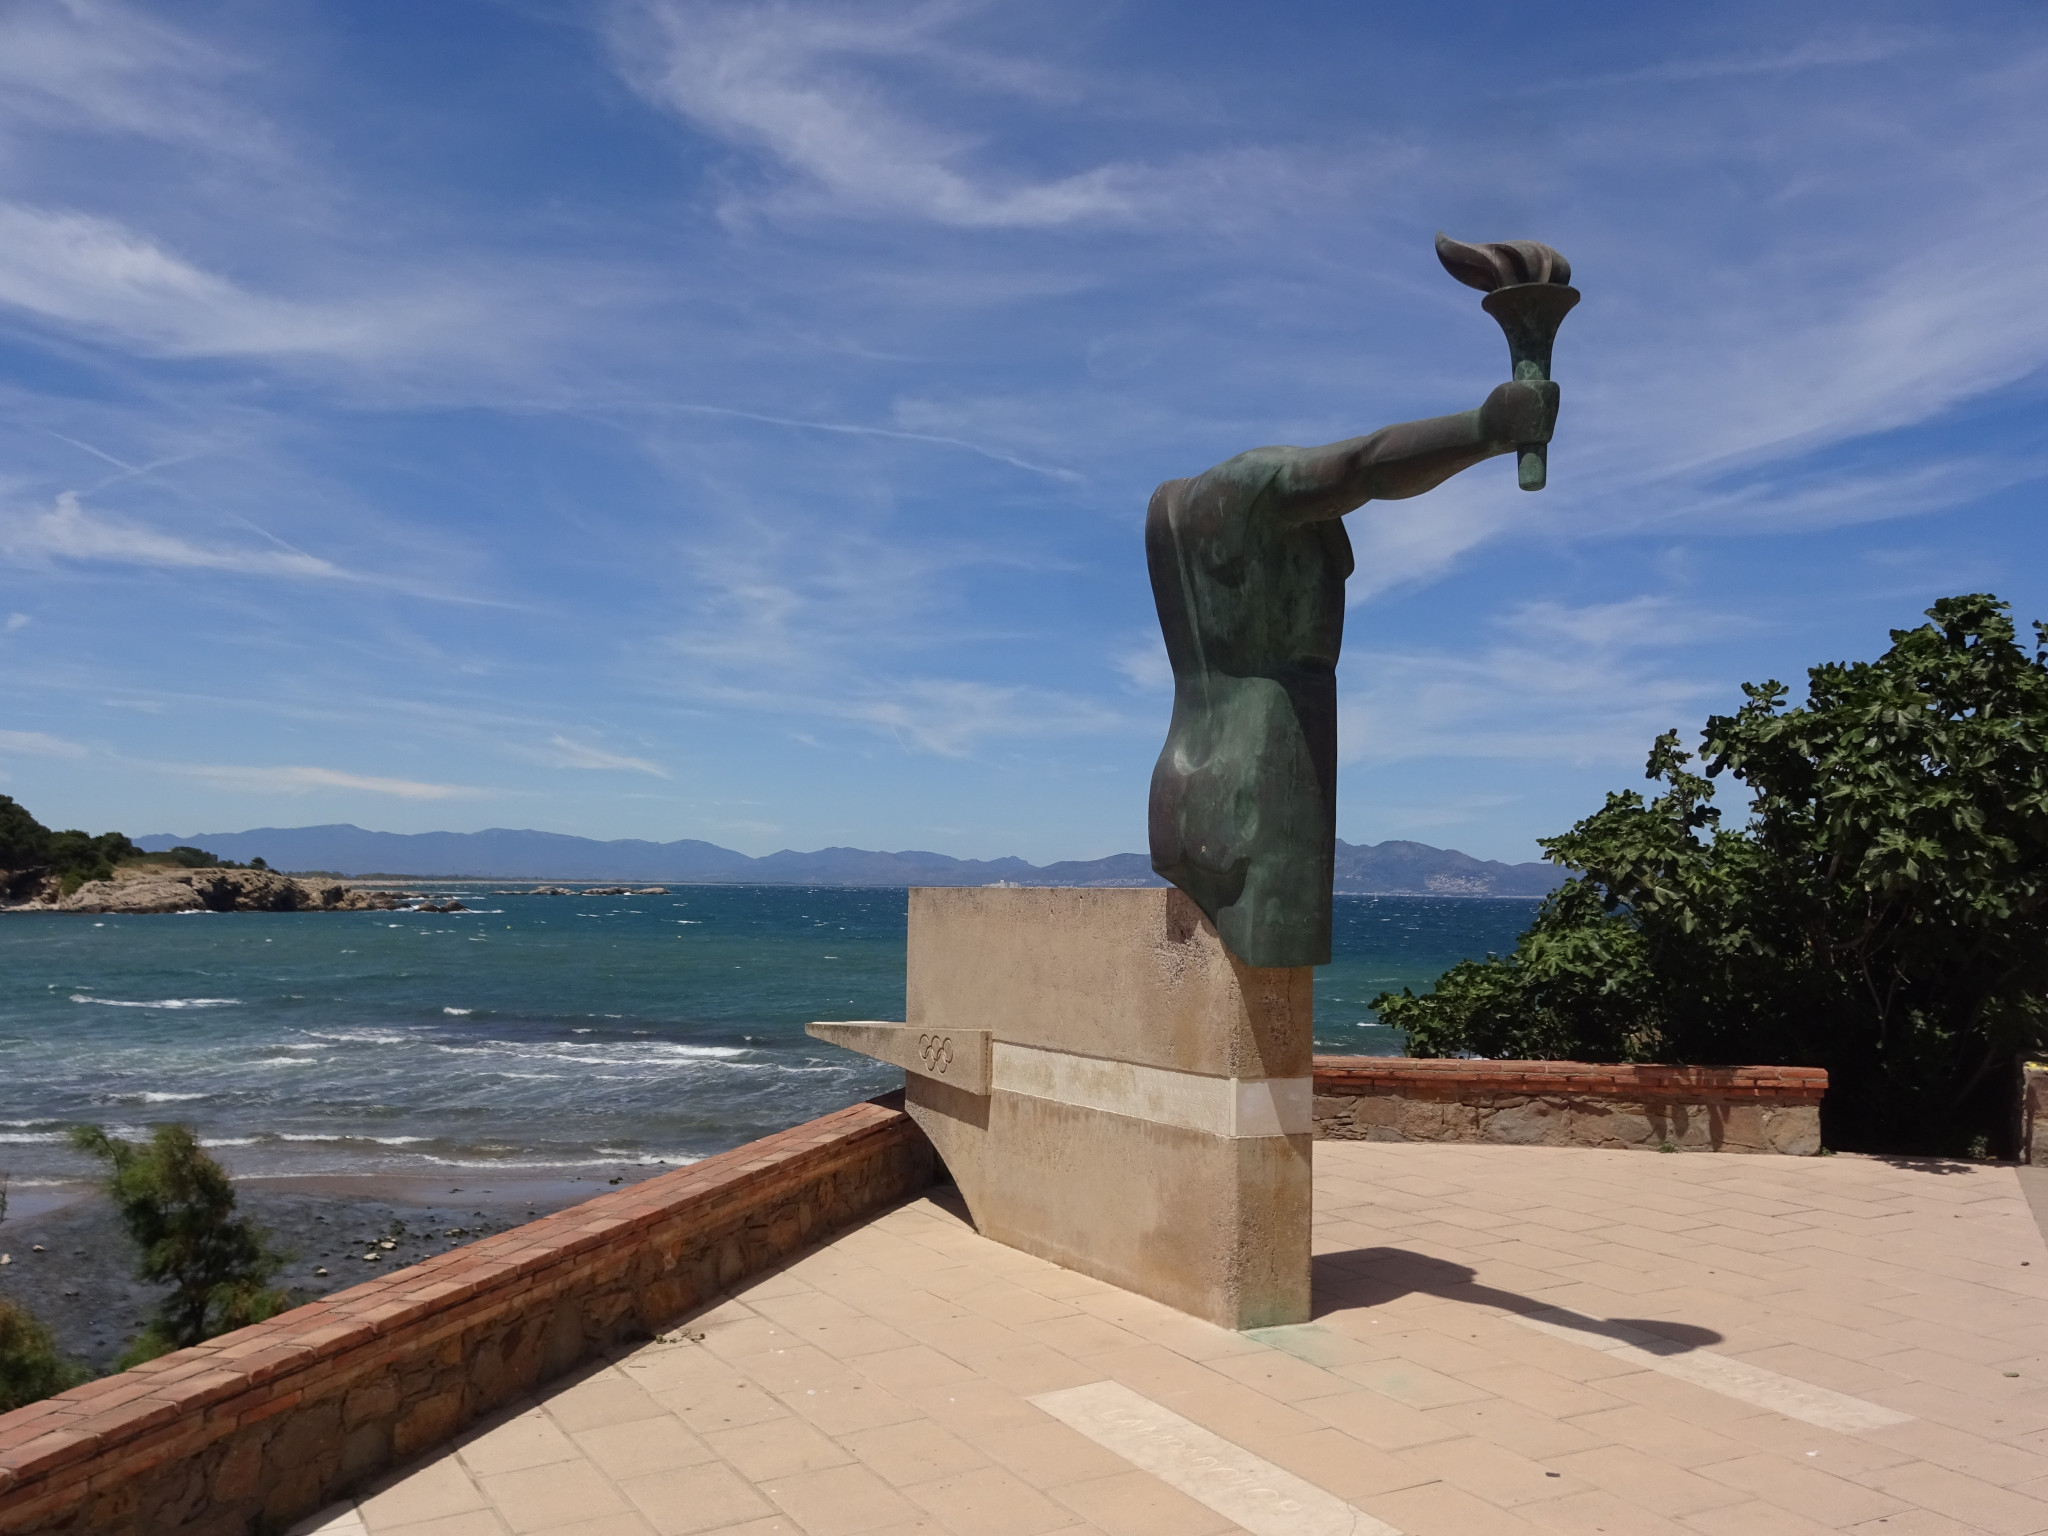 A statue was unveiled at Ampurias to mark the arrival of the Barcelona 1992 Olympic Torch ©Philip Barker